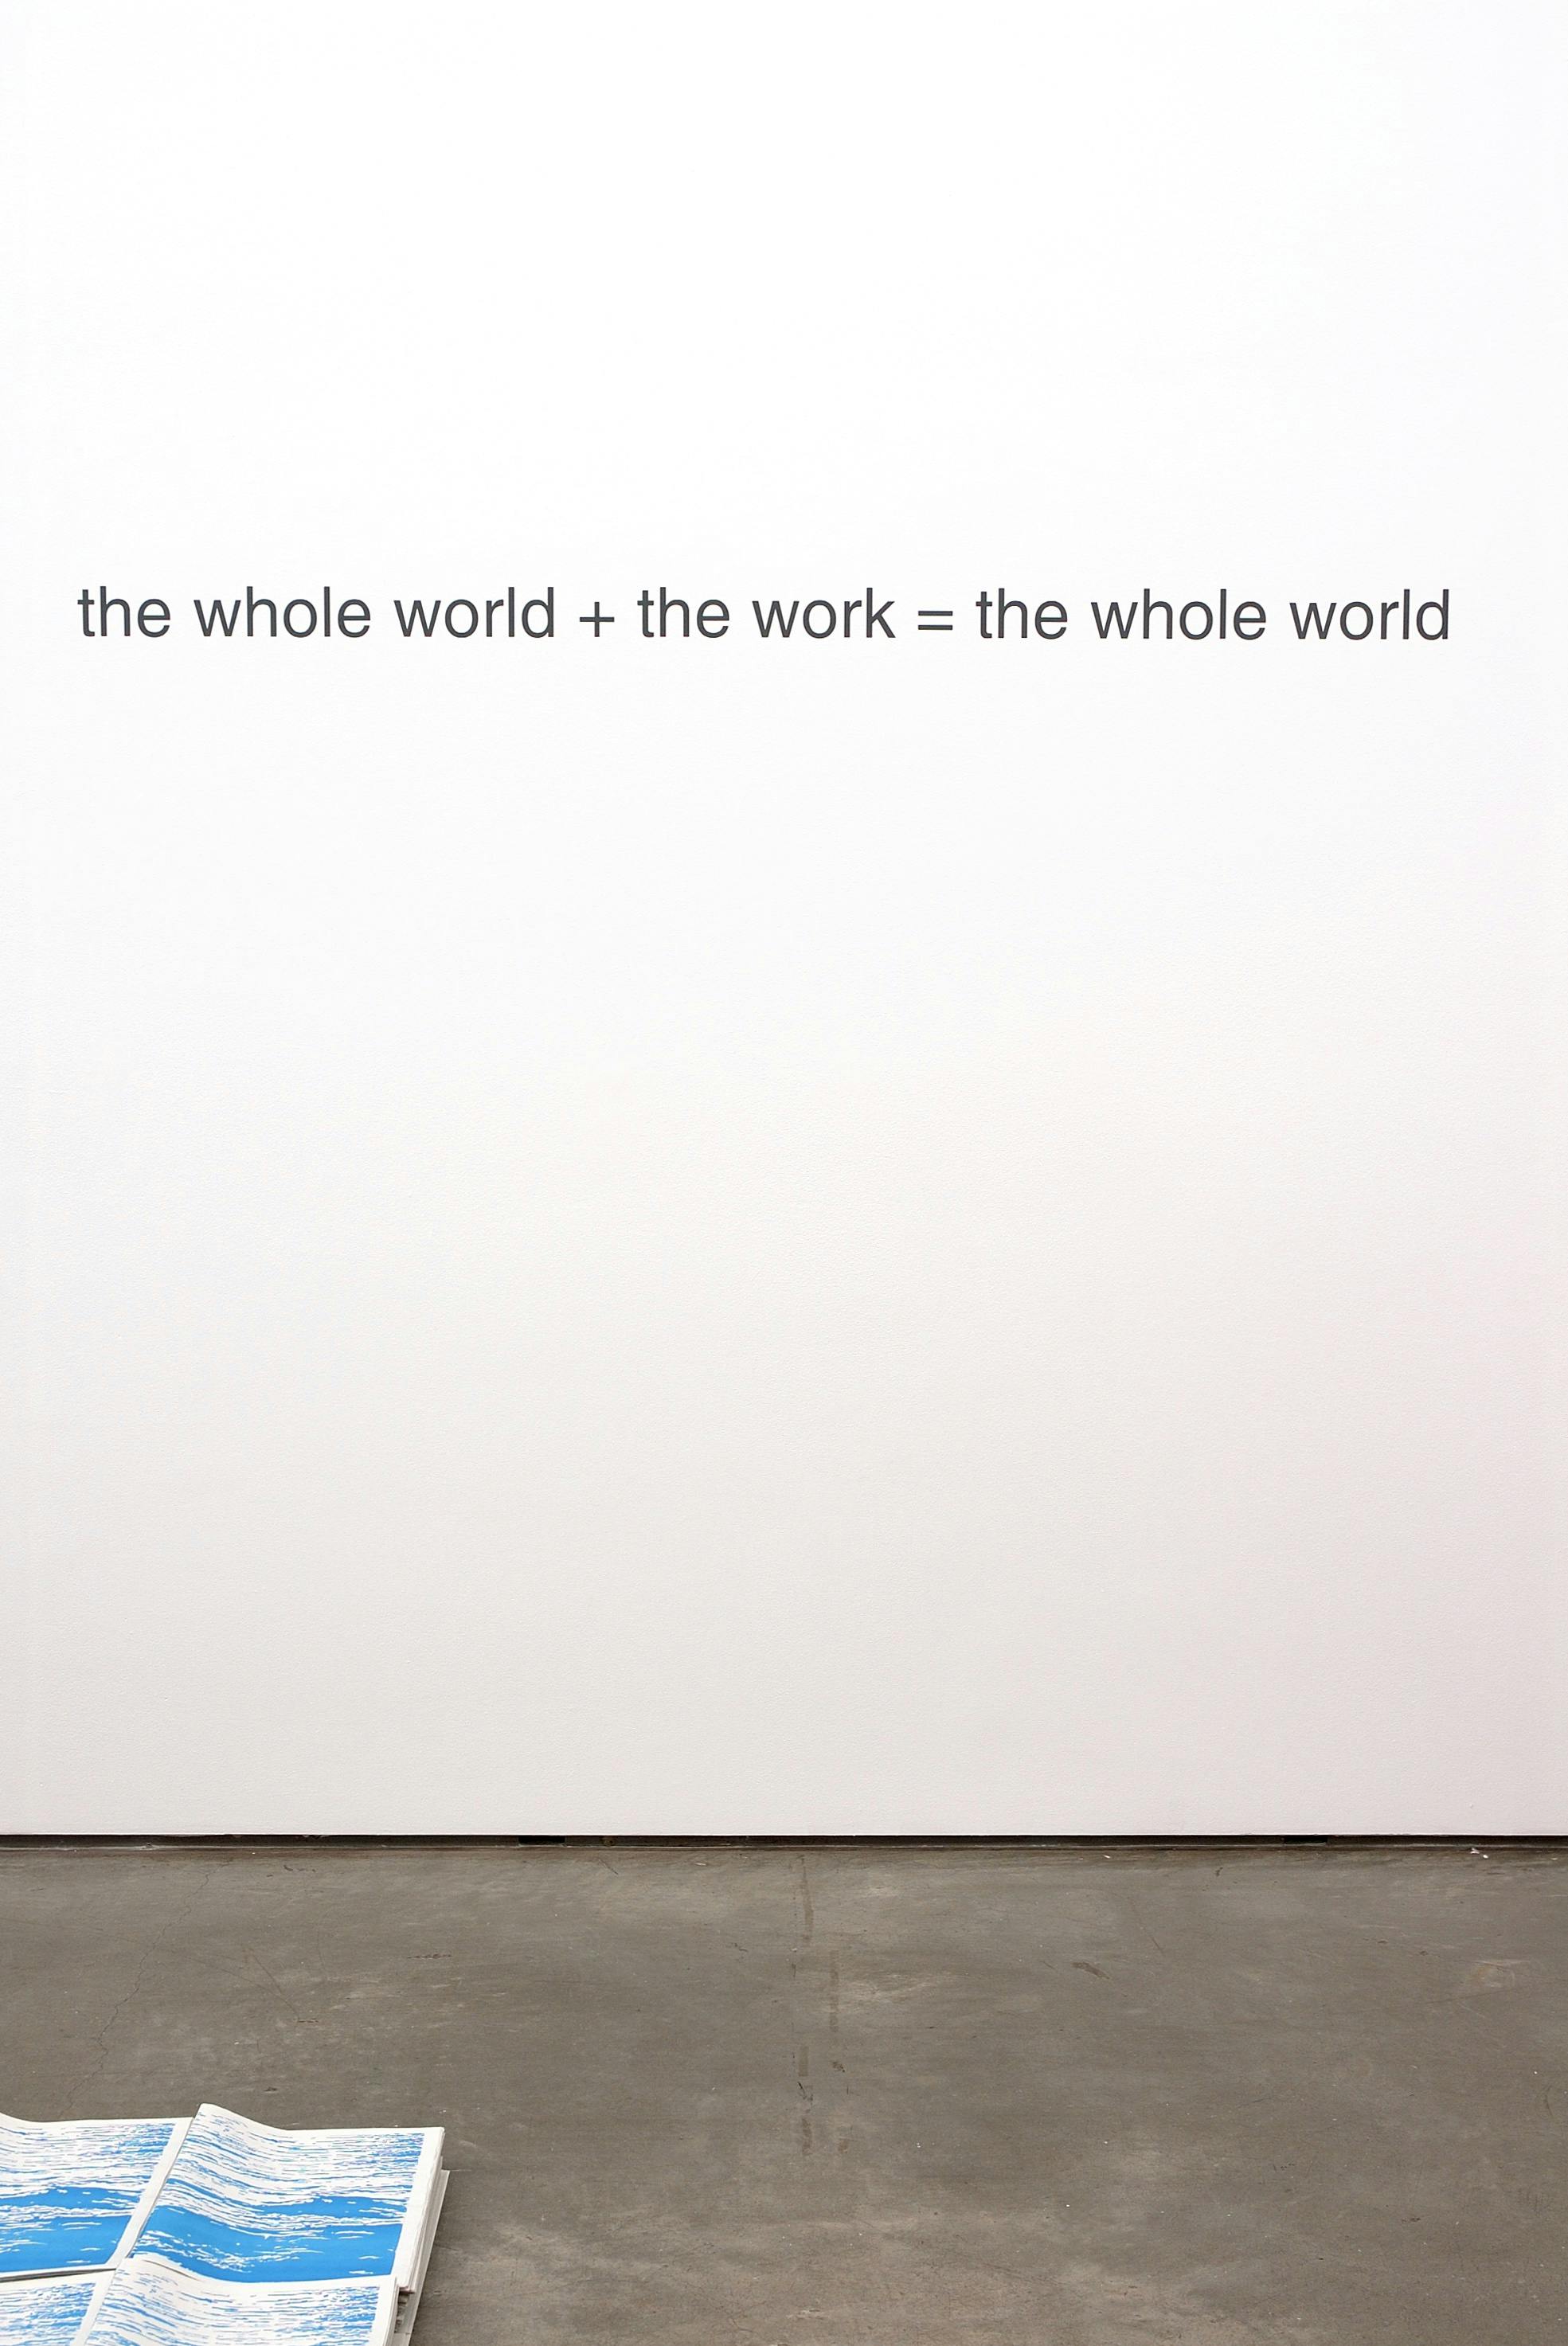 A text-based artwork is printed on a gallery wall. It reads, “the whole world + the work = the whole world” in black letters. A collection of blue and white paper is placed on the floor near the sign.